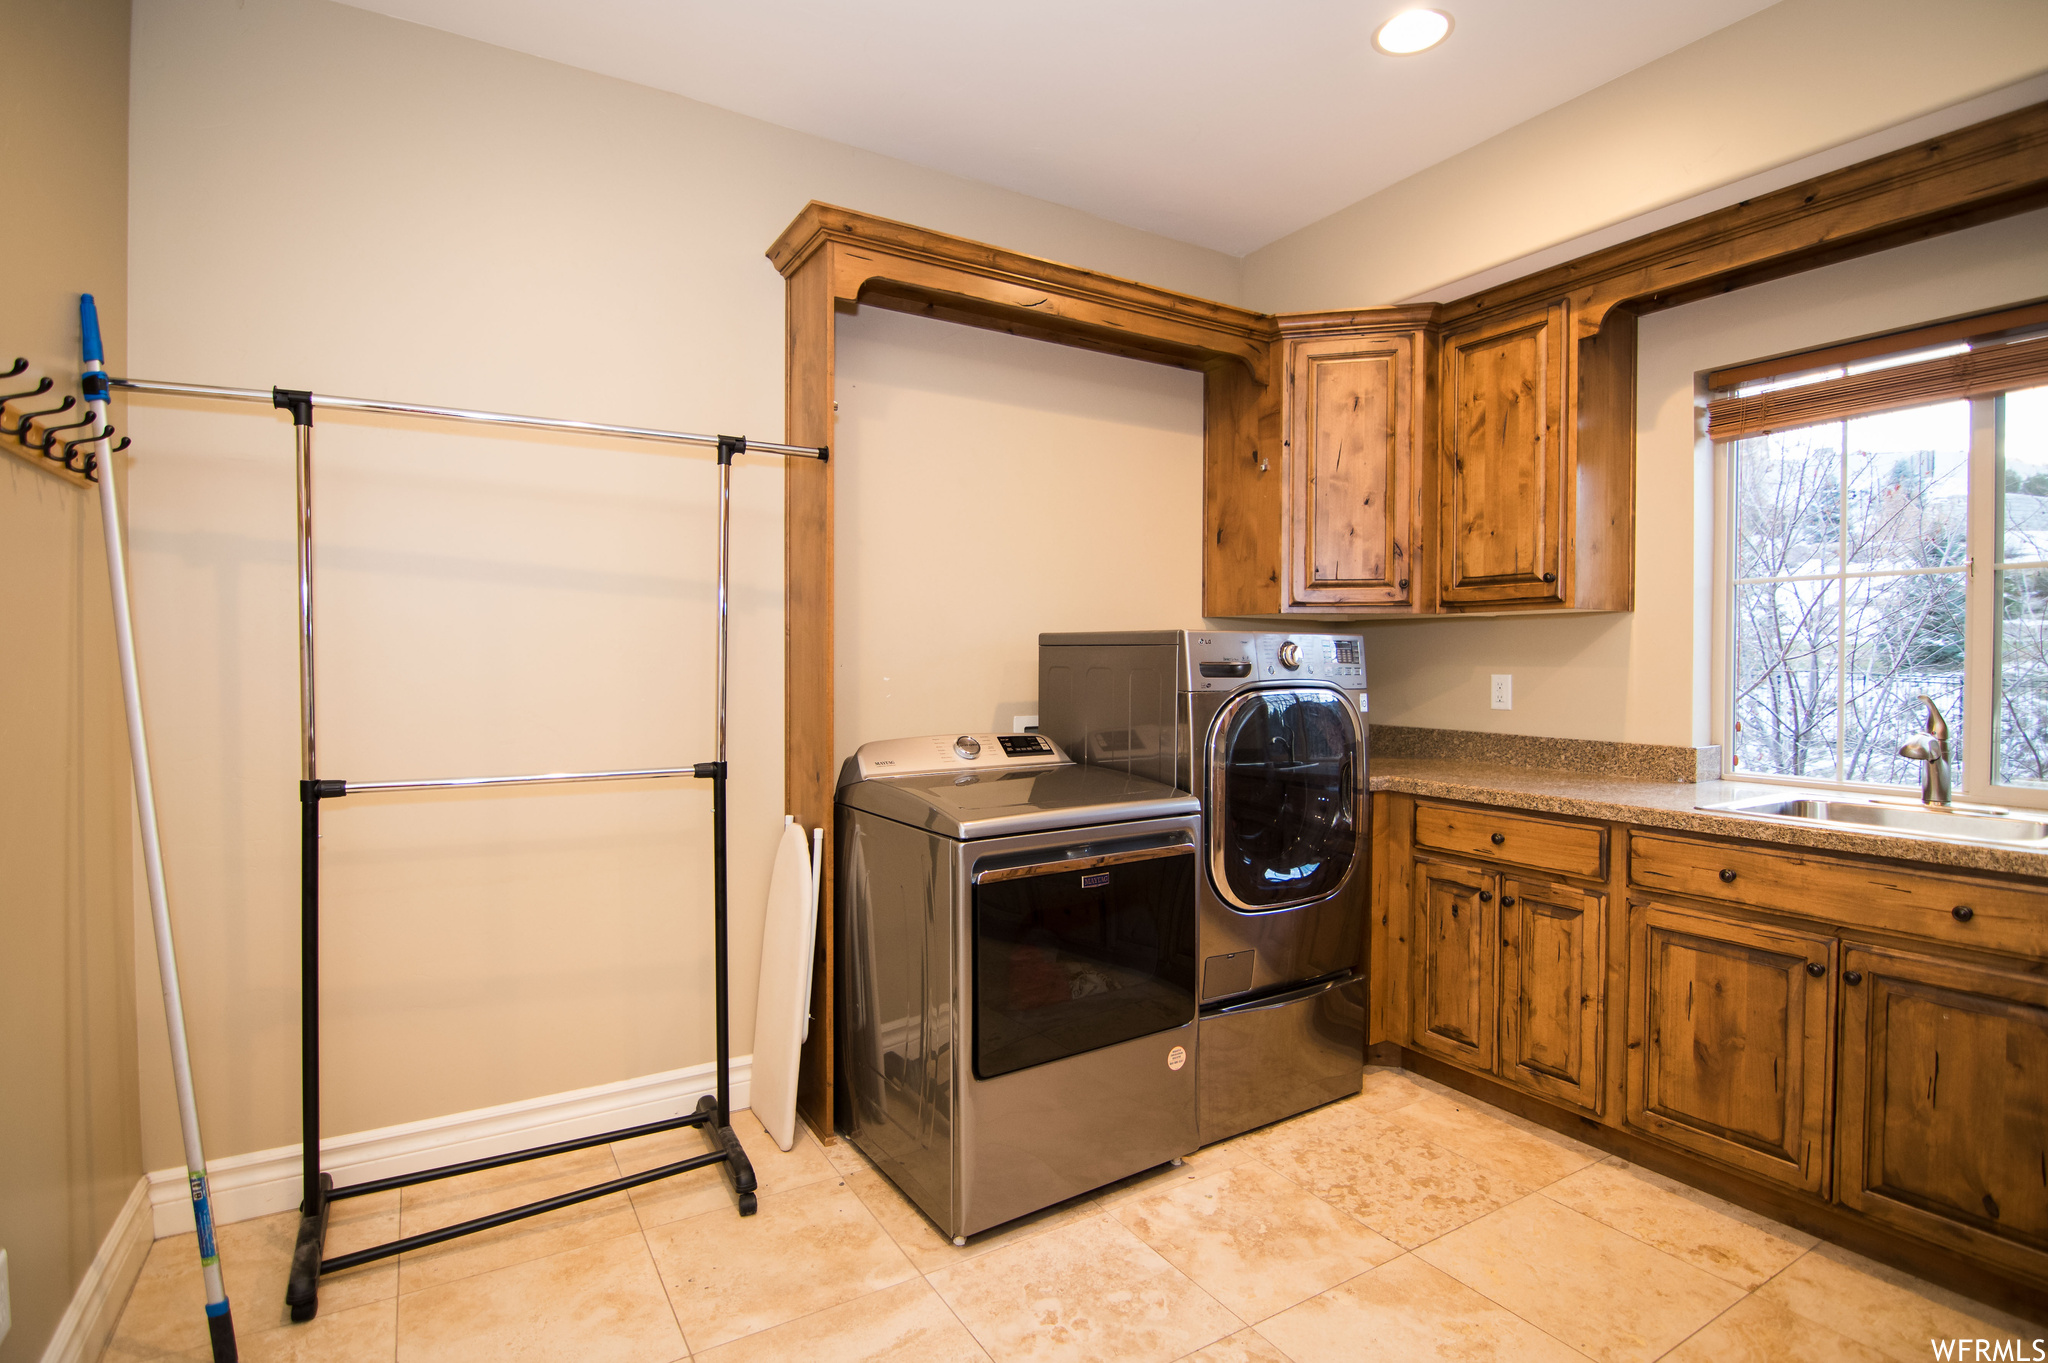 Clothes washing area with independent washer and dryer, cabinets, sink, and light tile floors